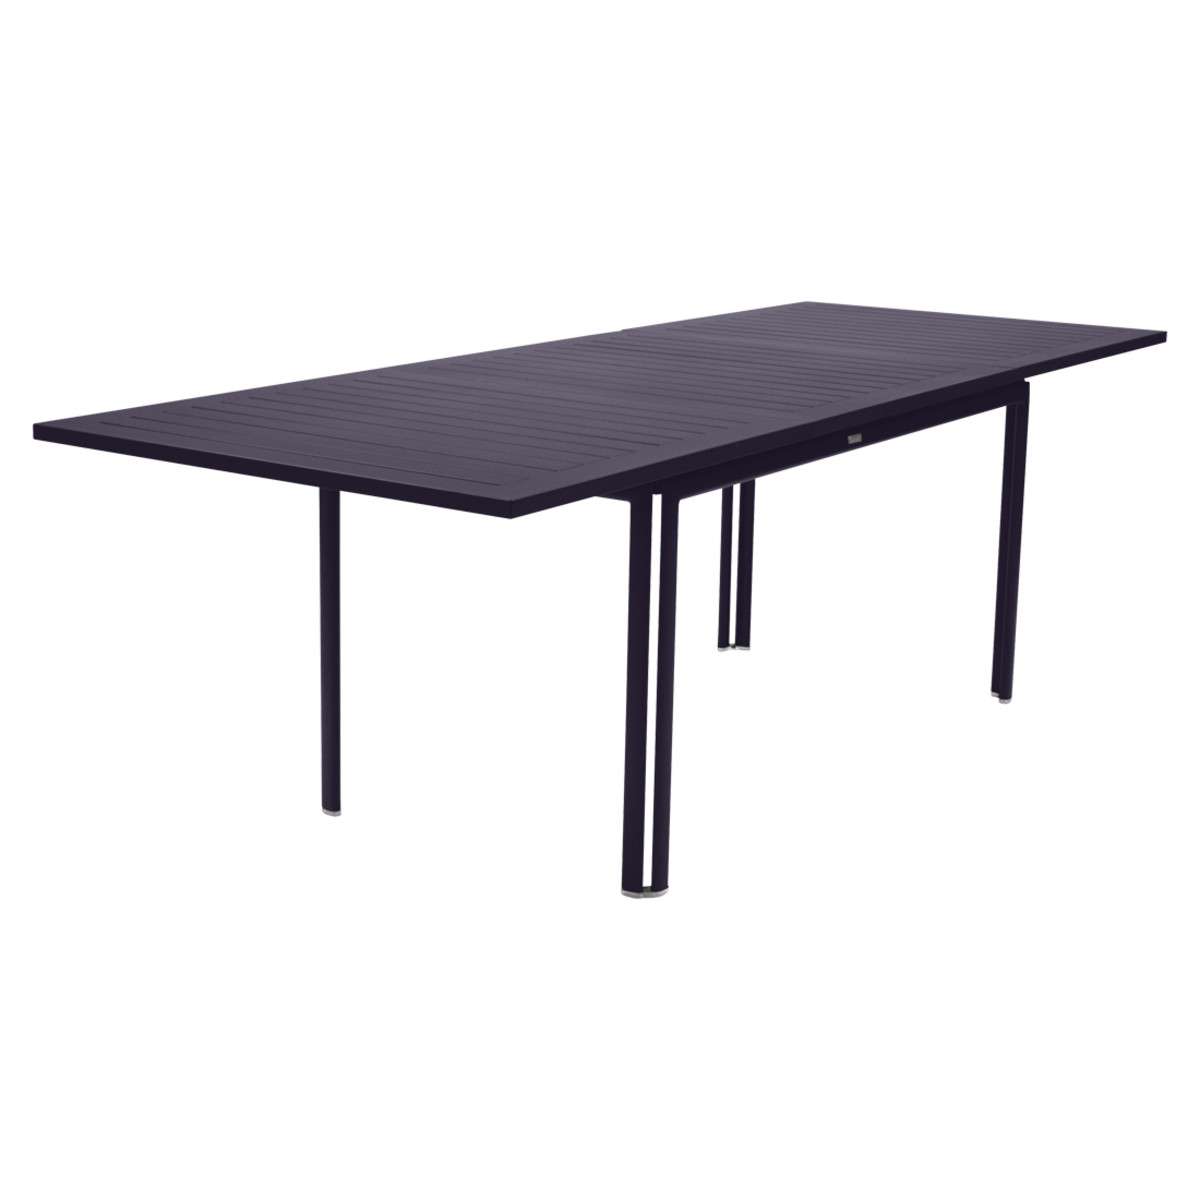 COSTA / TABLE WITH EXTENSION 160/240 X 90 CM